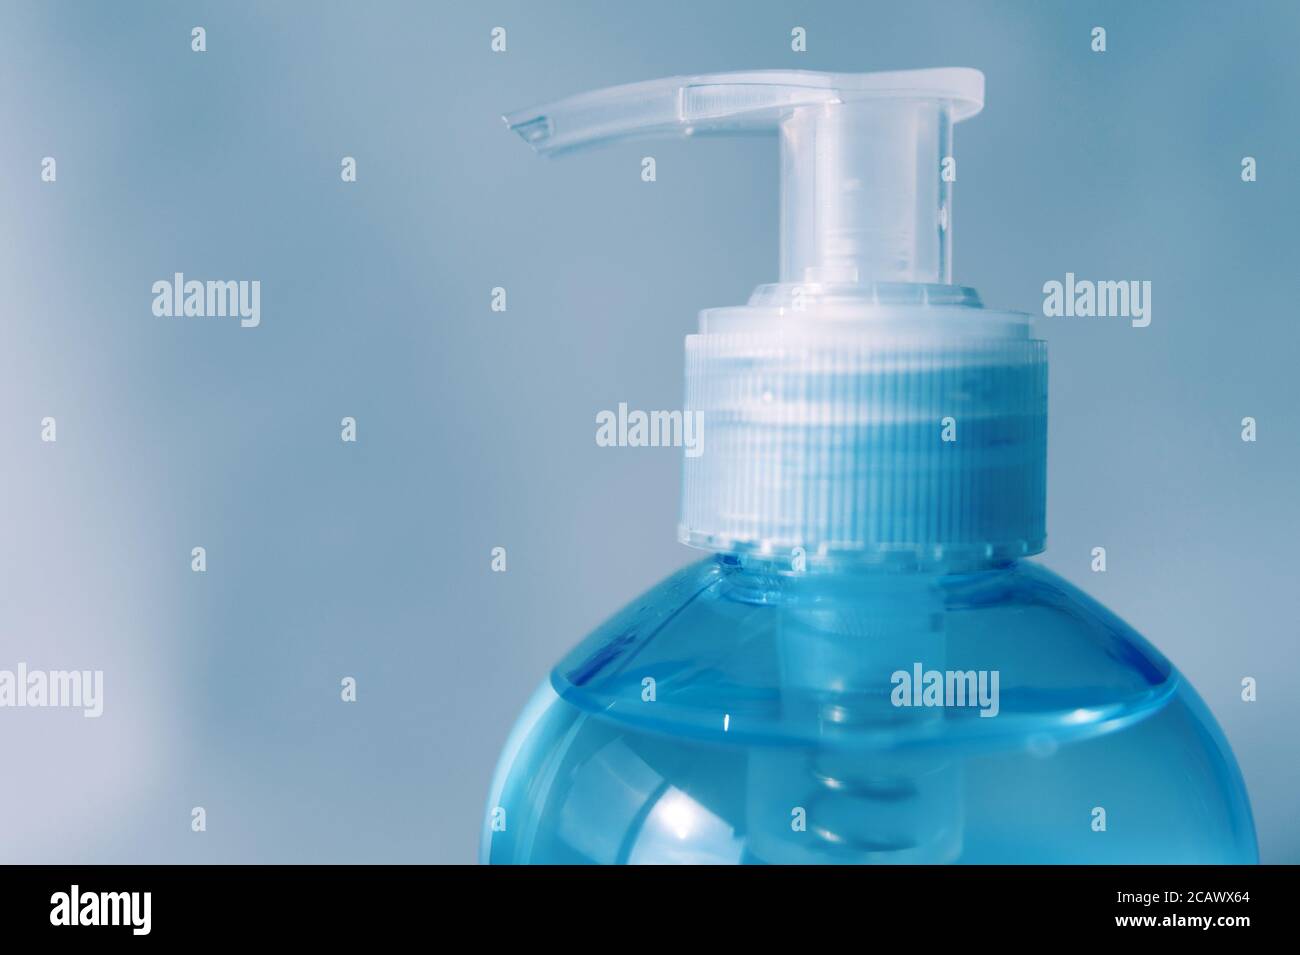 Download Pump Bottle High Resolution Stock Photography And Images Alamy Yellowimages Mockups